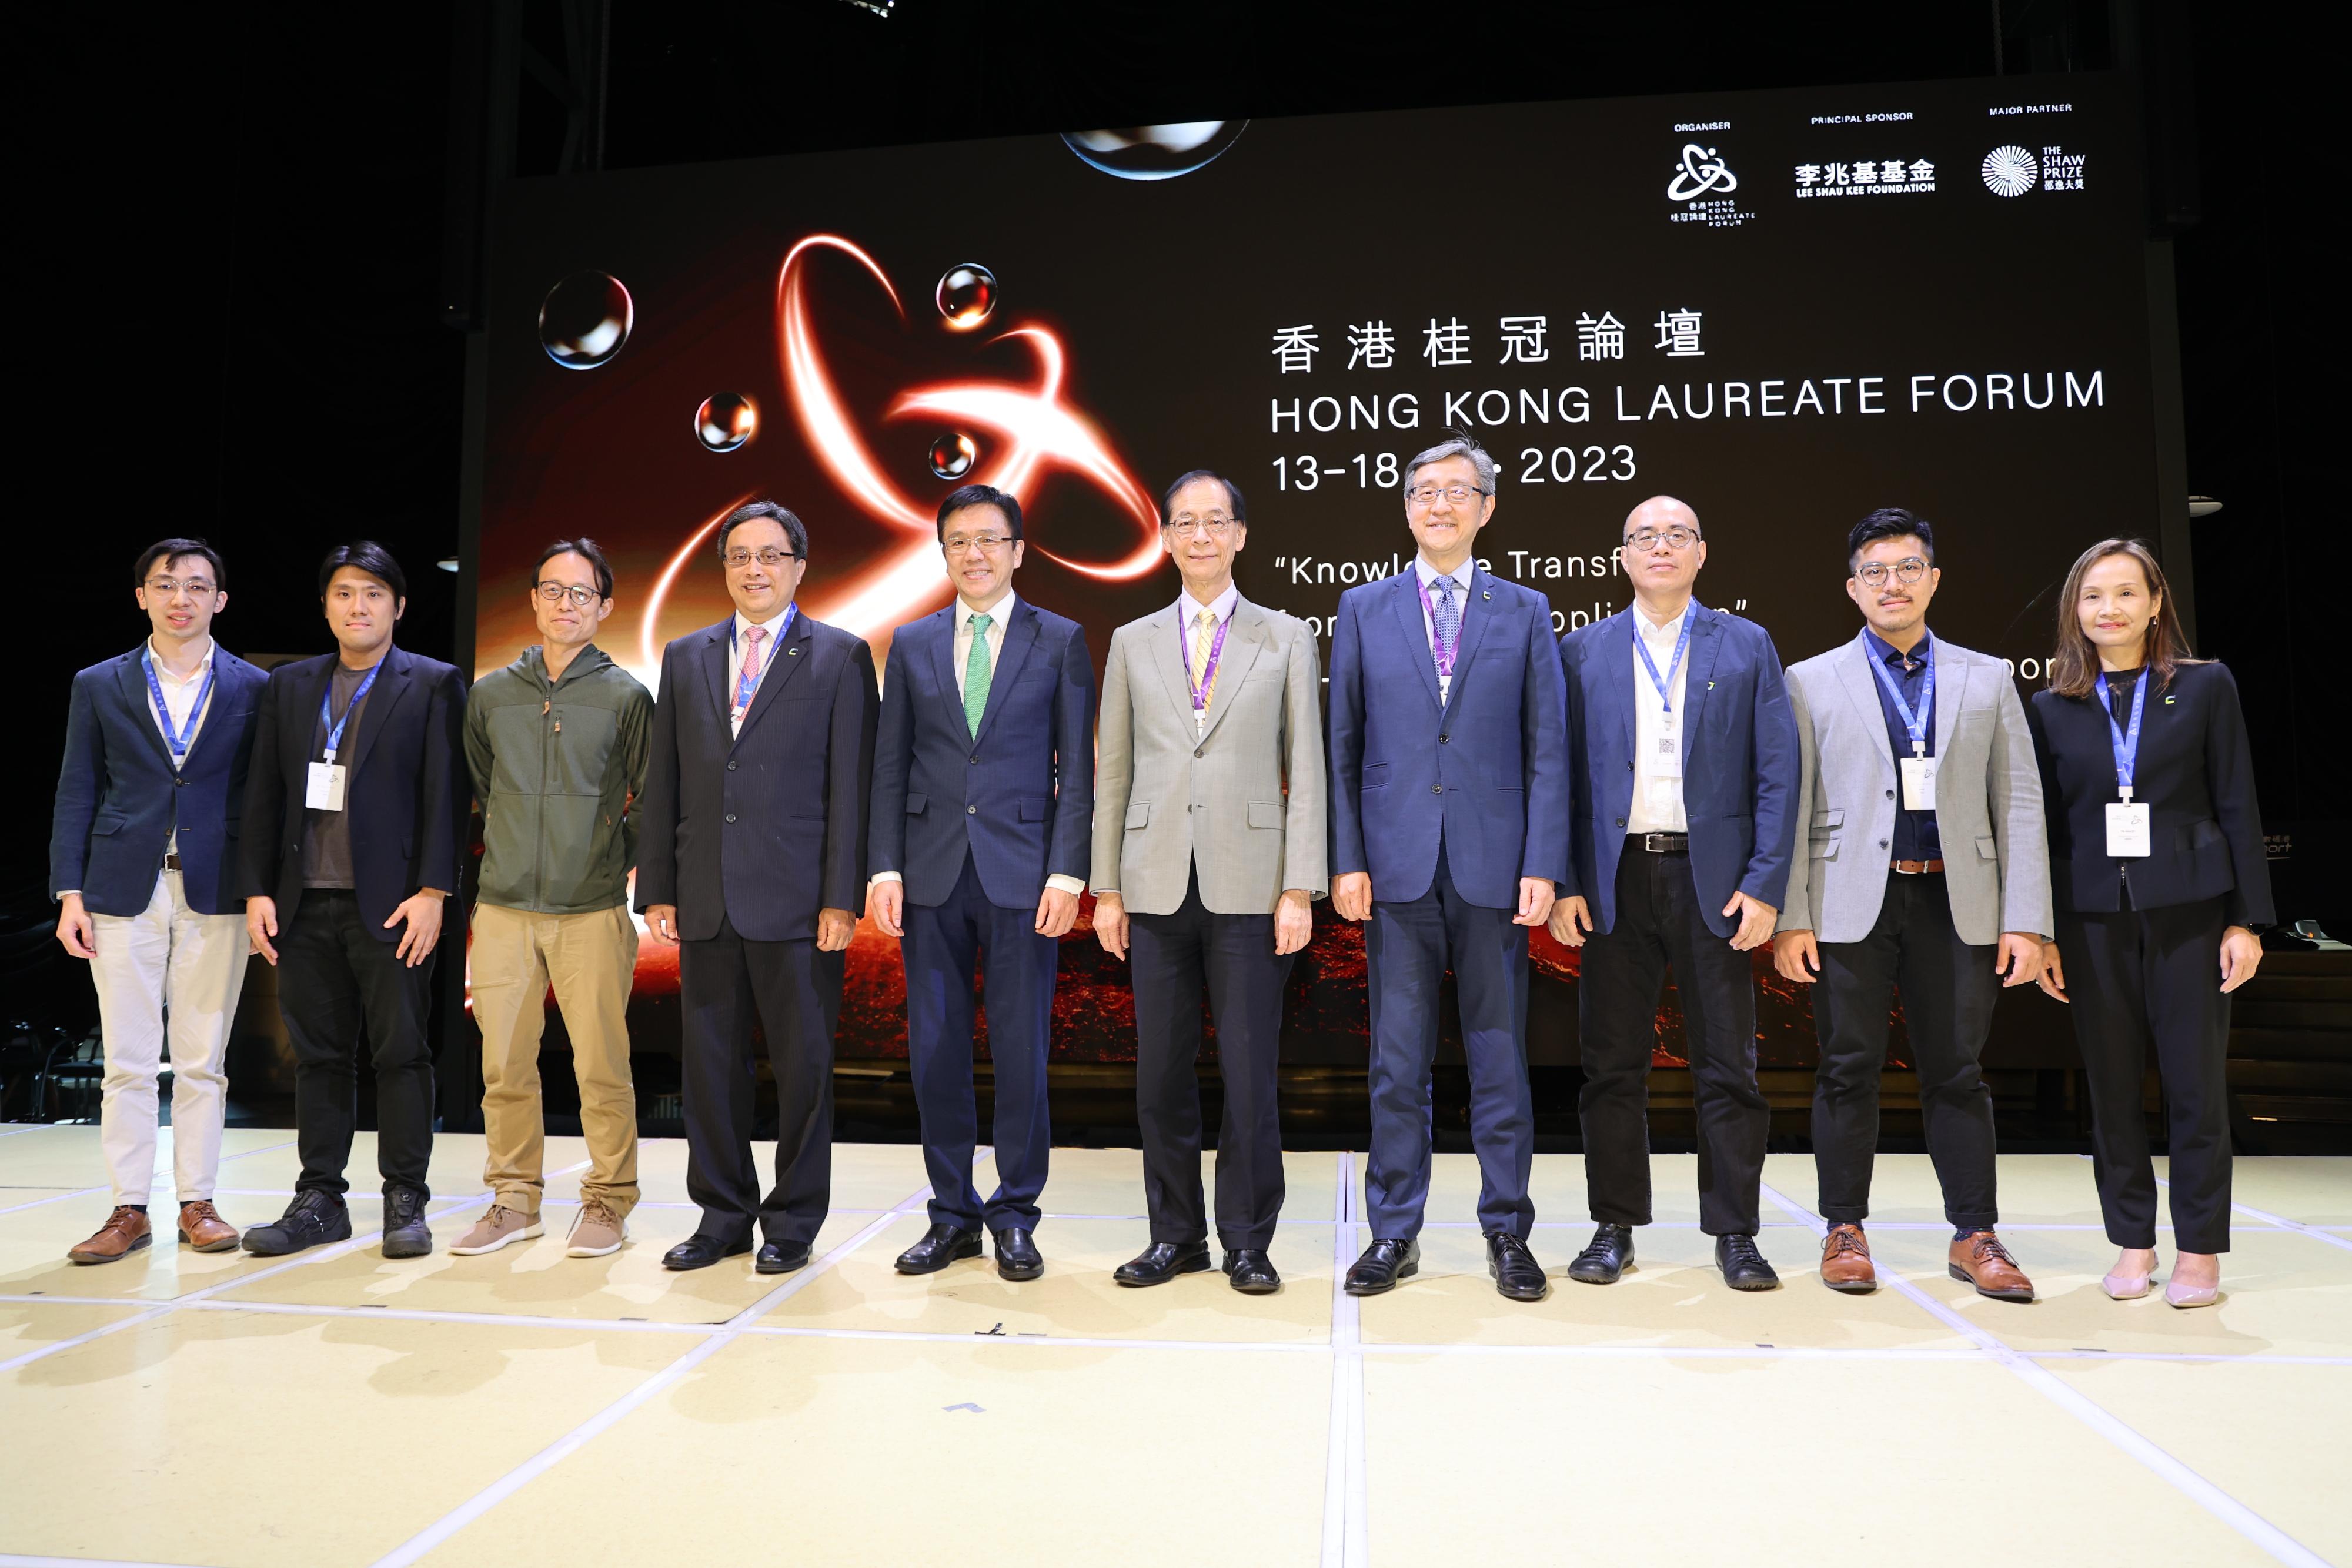 The Secretary for Innovation, Technology and Industry, Professor Sun Dong, attended the Hong Kong Laureate Forum 2023 Co-organised Programme with Cyberport: Knowledge Transfer, from R&D to application today (November 17). Photo shows (from fourth left) the Chairman of the Board of Directors of Hong Kong Cyberport Management Company Limited (HKCMCL), Mr Simon Chan; Professor Sun; the Chairman of the Council of the Hong Kong Laureate Forum, Professor Timothy Tong; and the Chief Executive Officer of HKCMCL, Mr Peter Yan, at the event.